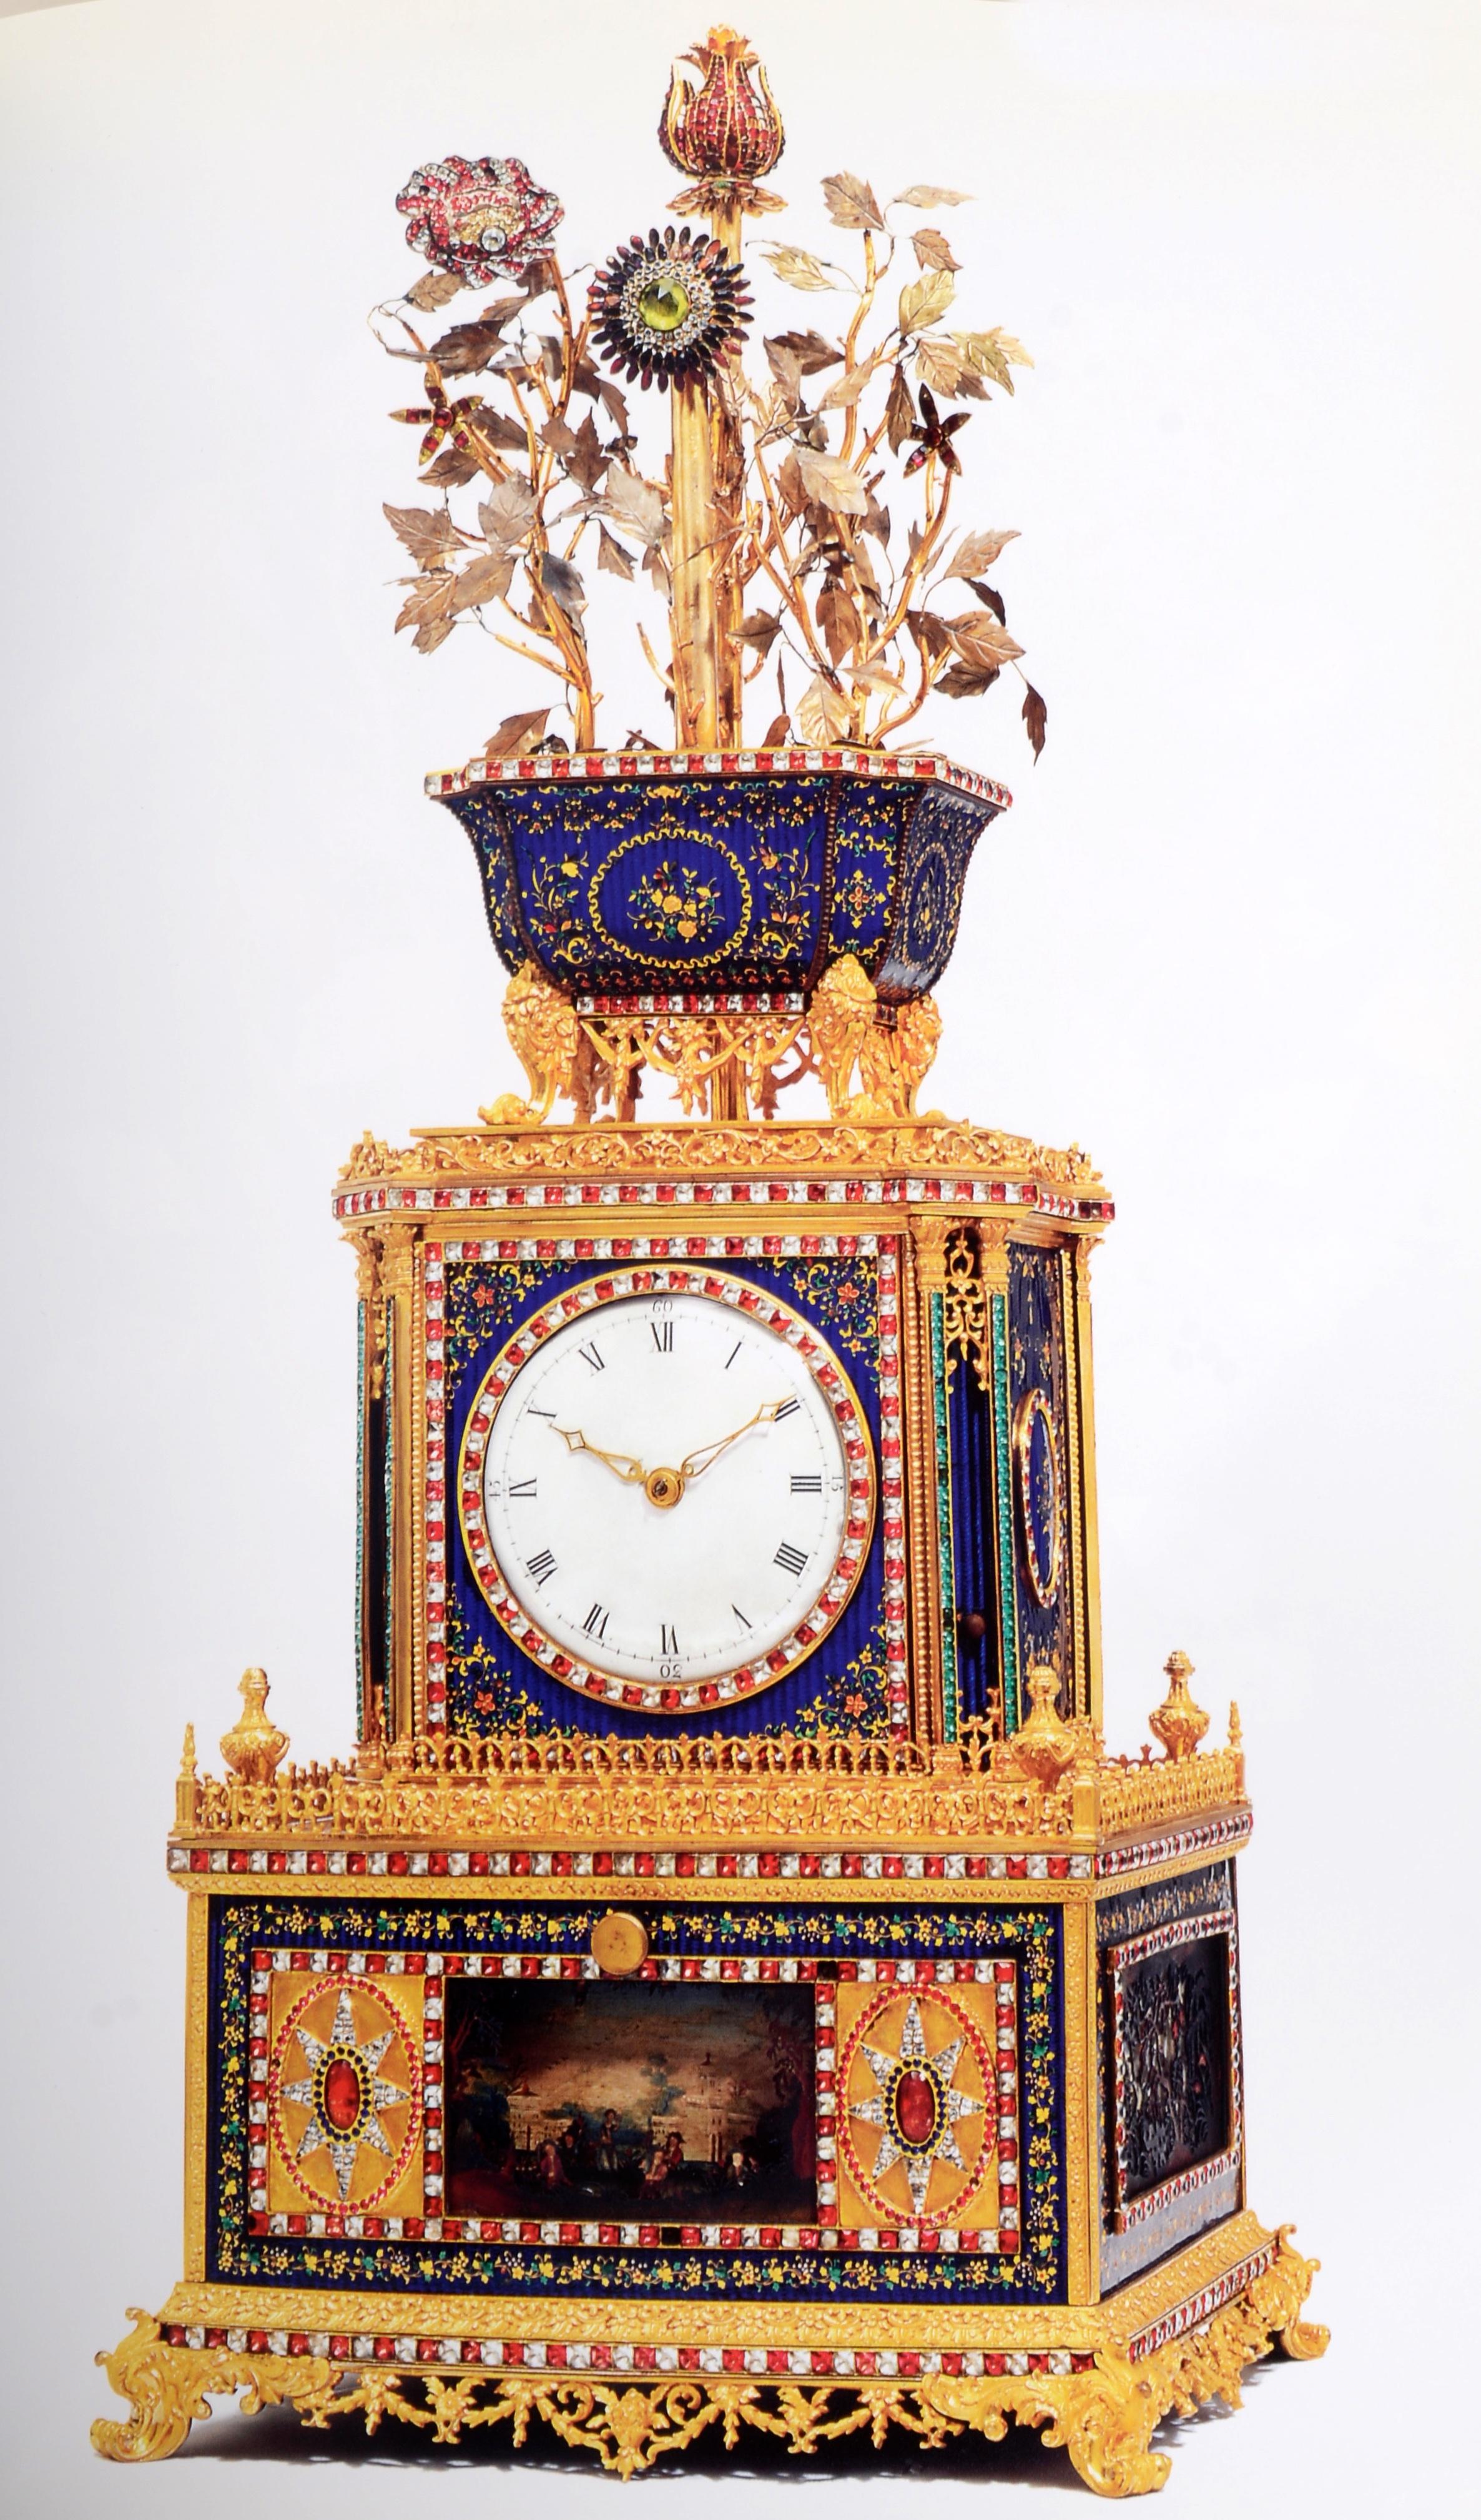 Contemporary Magnificent Clocks for Chinese Imperial Court from the Nezu Museum, Christie's For Sale